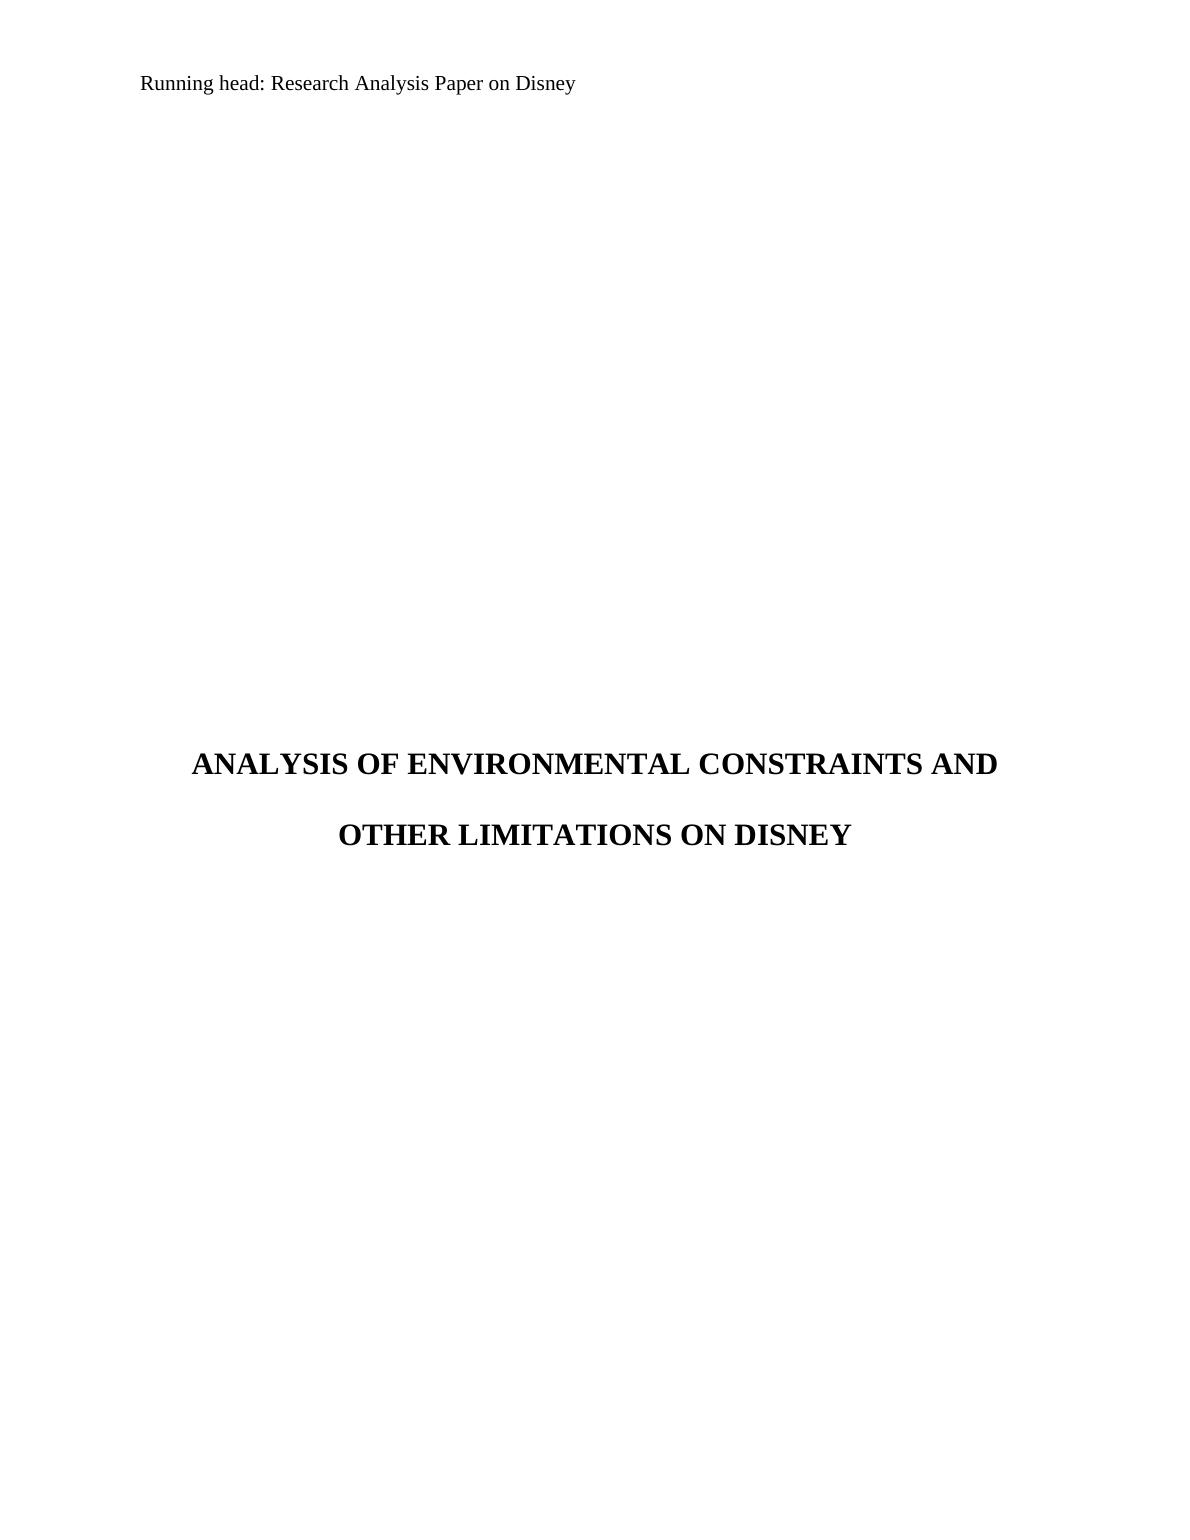 Analysis of Environmental Constraints and Other Limitations on Disney_1